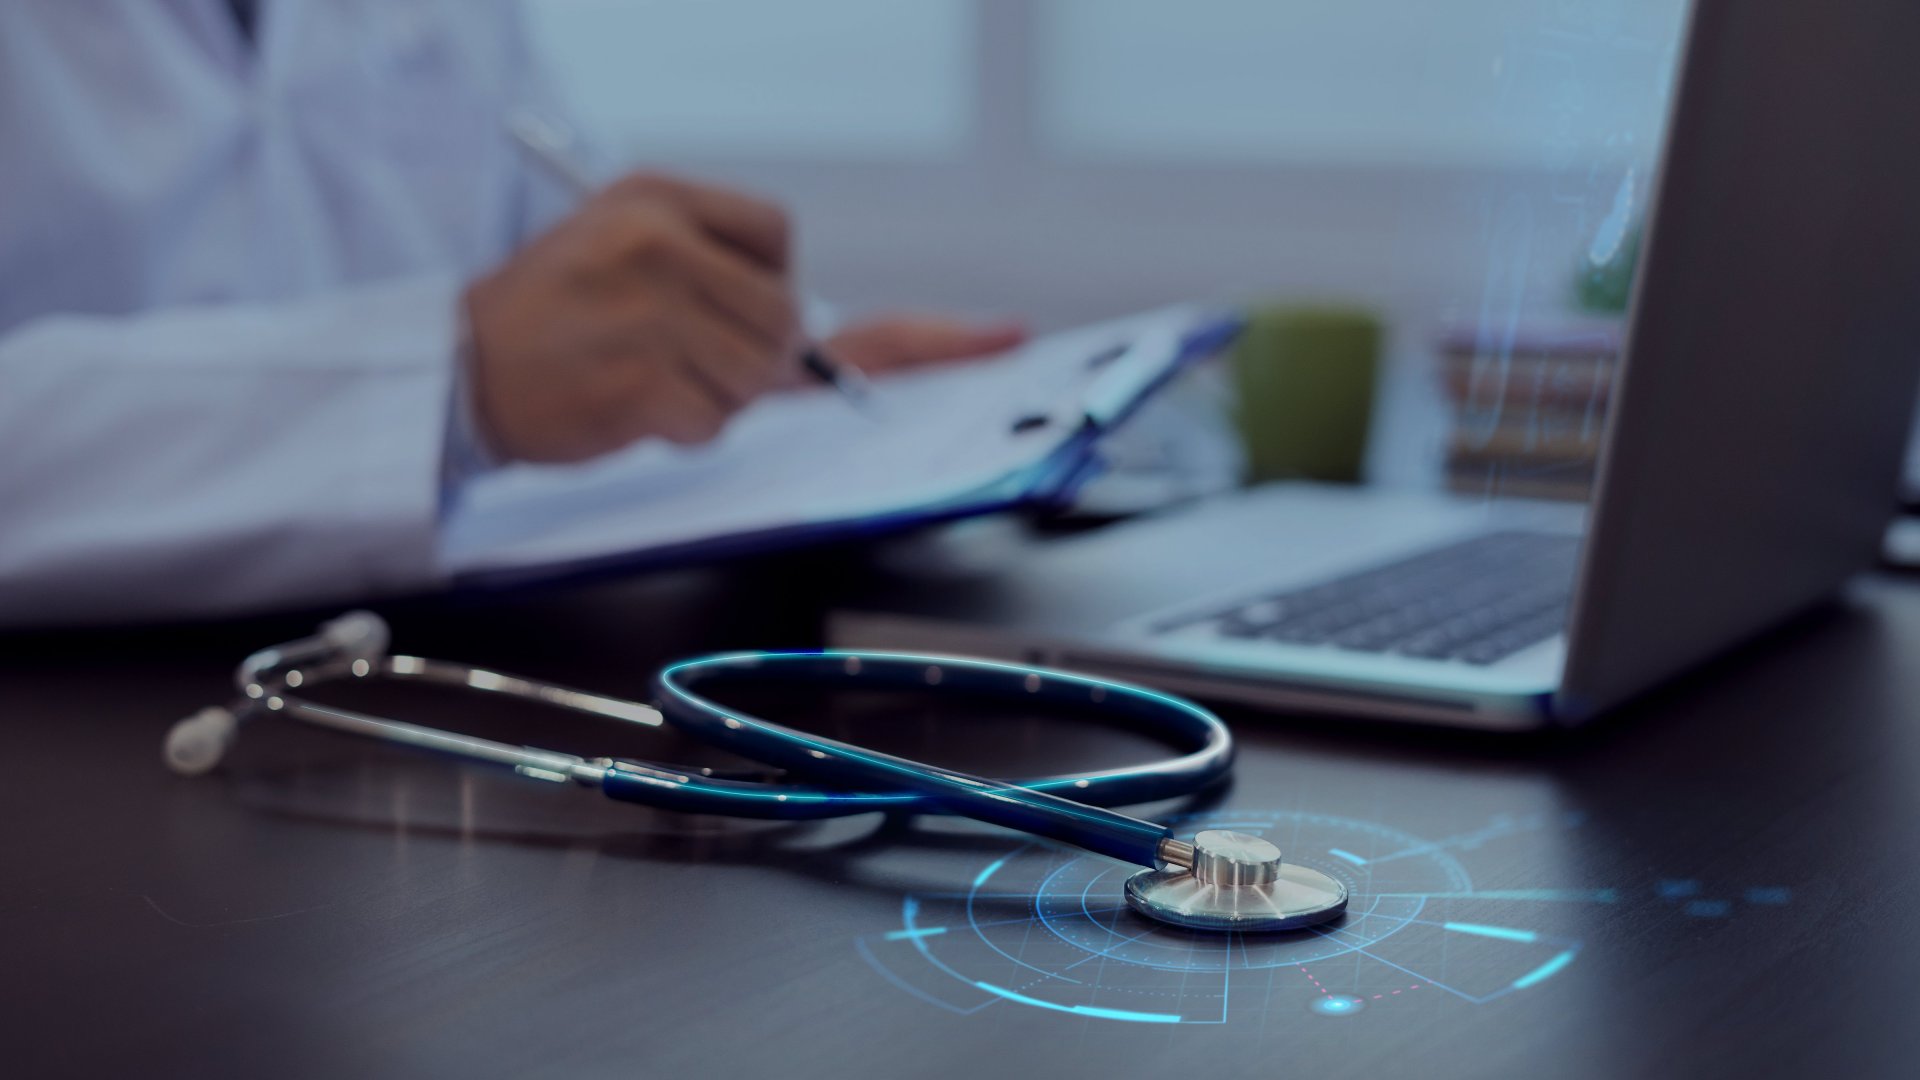 Cyber security in the healthcare industry